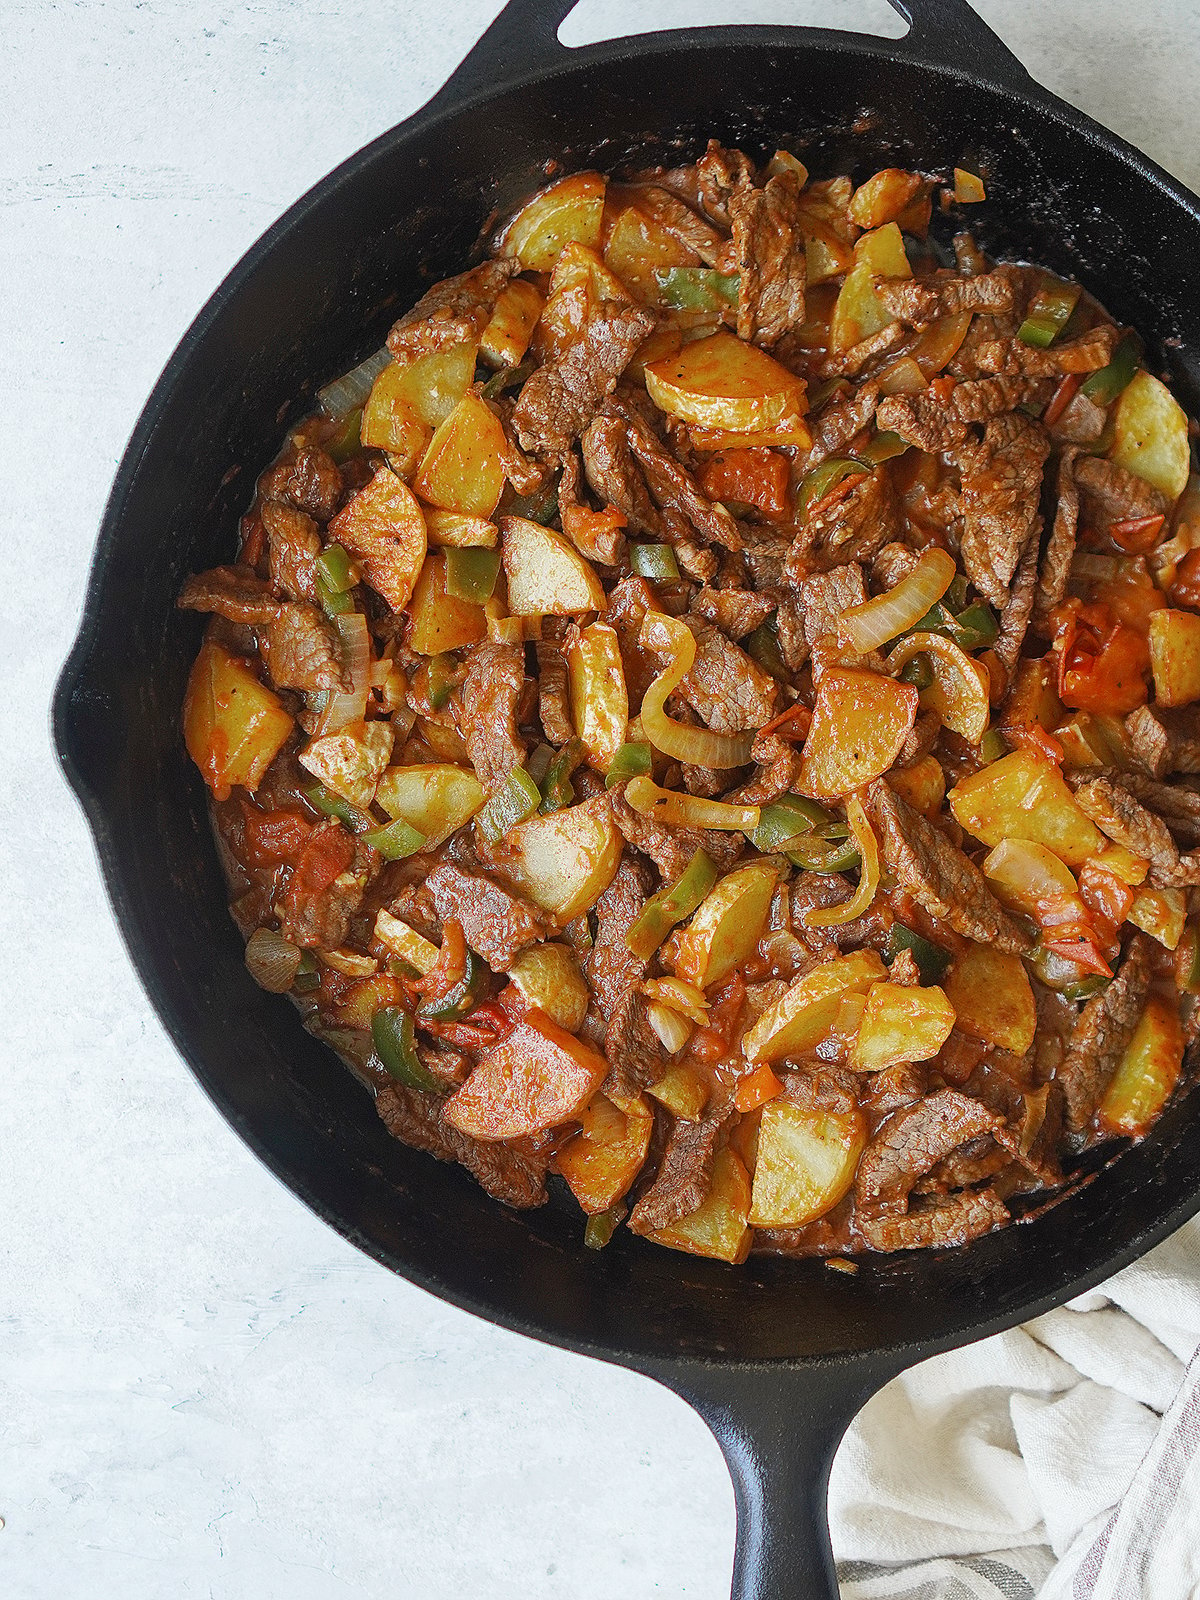 A skillet with cooked steak, potatoes and chiles